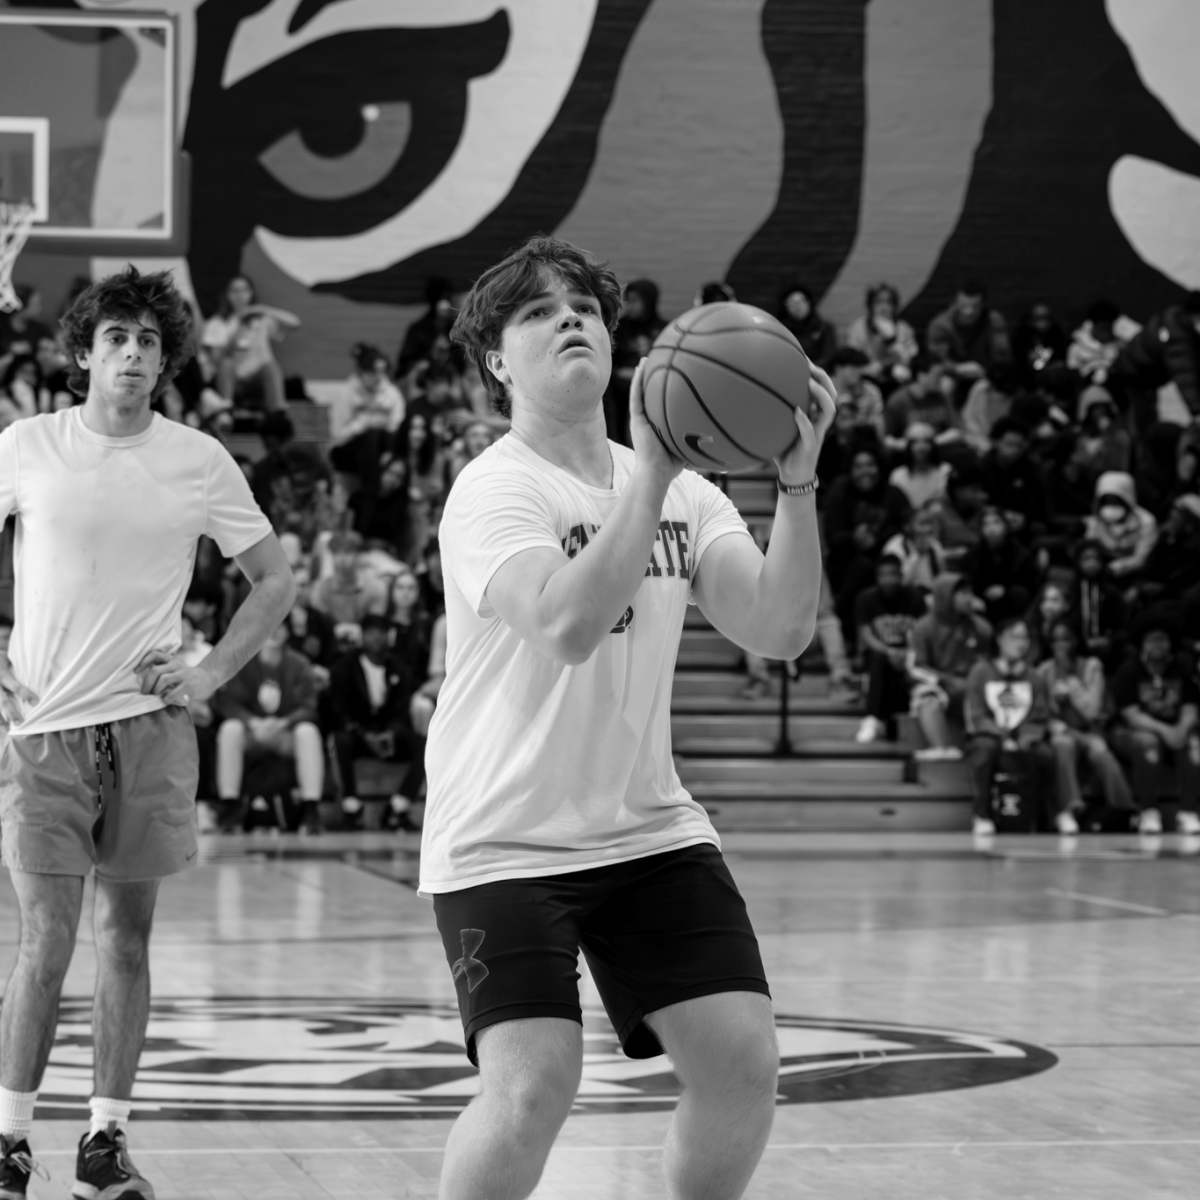 PLAYING+UNDER+PRESSURE+-+Senior+Jackson+Kletter+prepares+to+take+a+shot+at+the+students+versus+staff+basketball+game.+The+Pig+Devils%2C+who+won+the+student+intramural+tournament%2C+fell+short+against+the+staff.